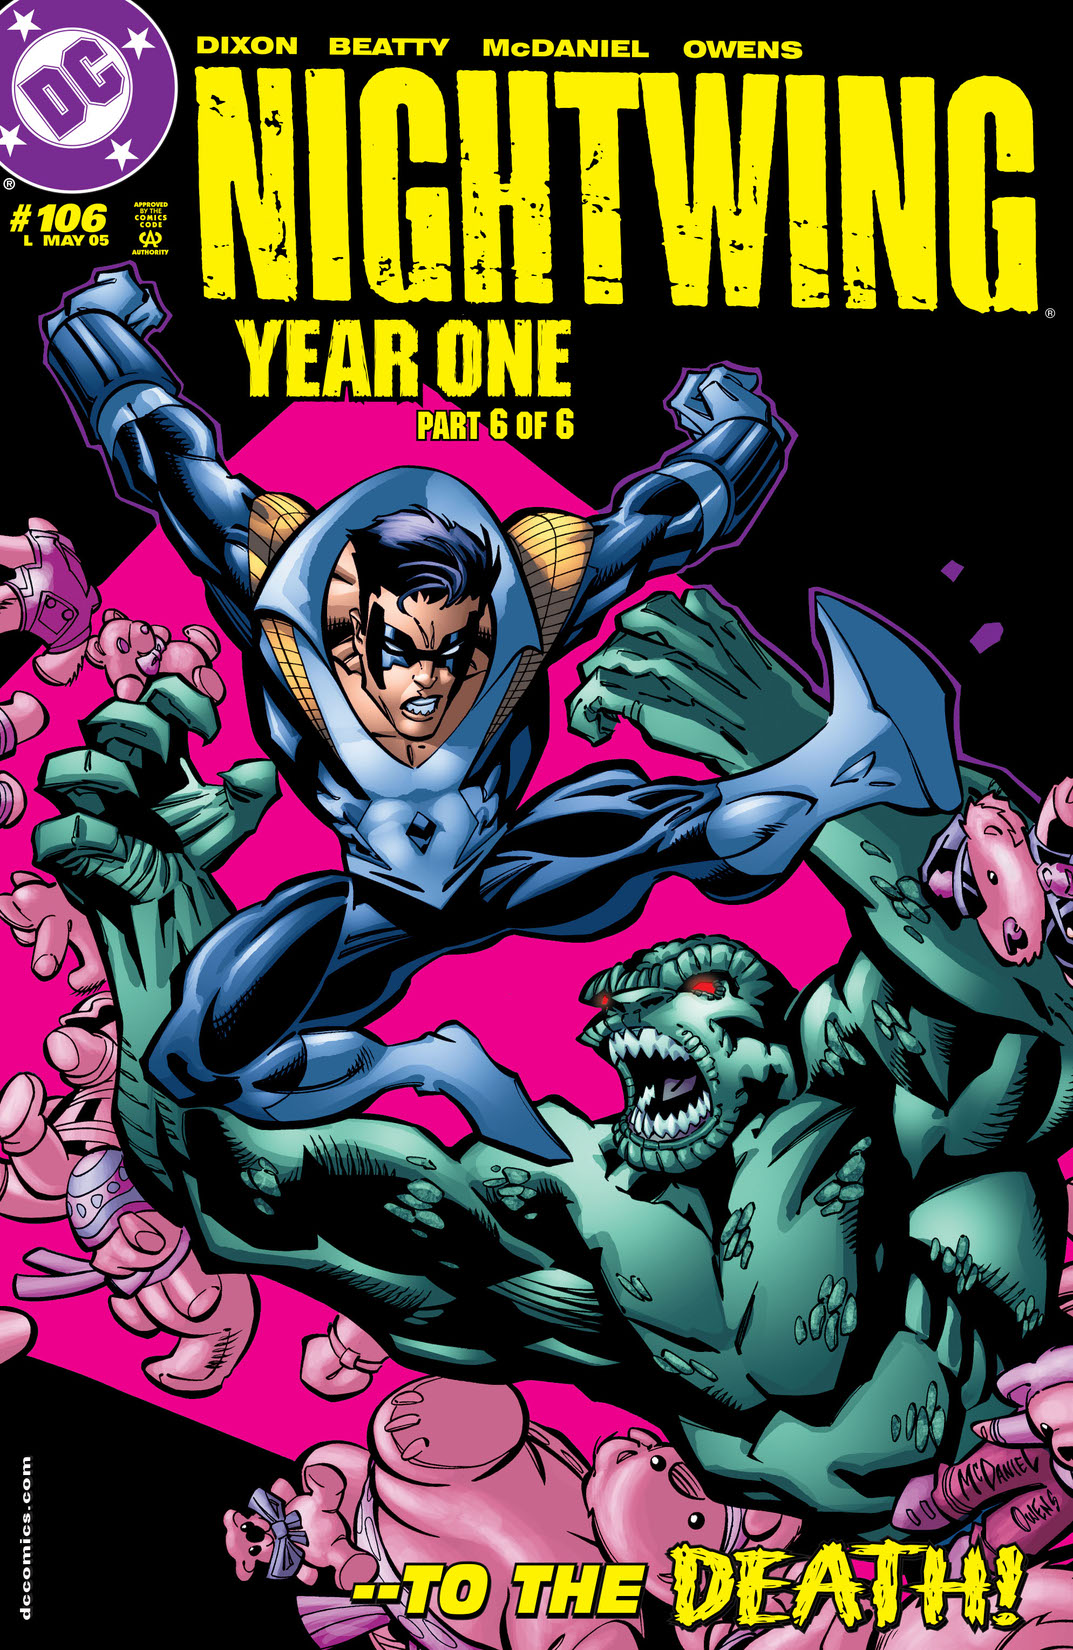 Nightwing (1996-) #106 preview images